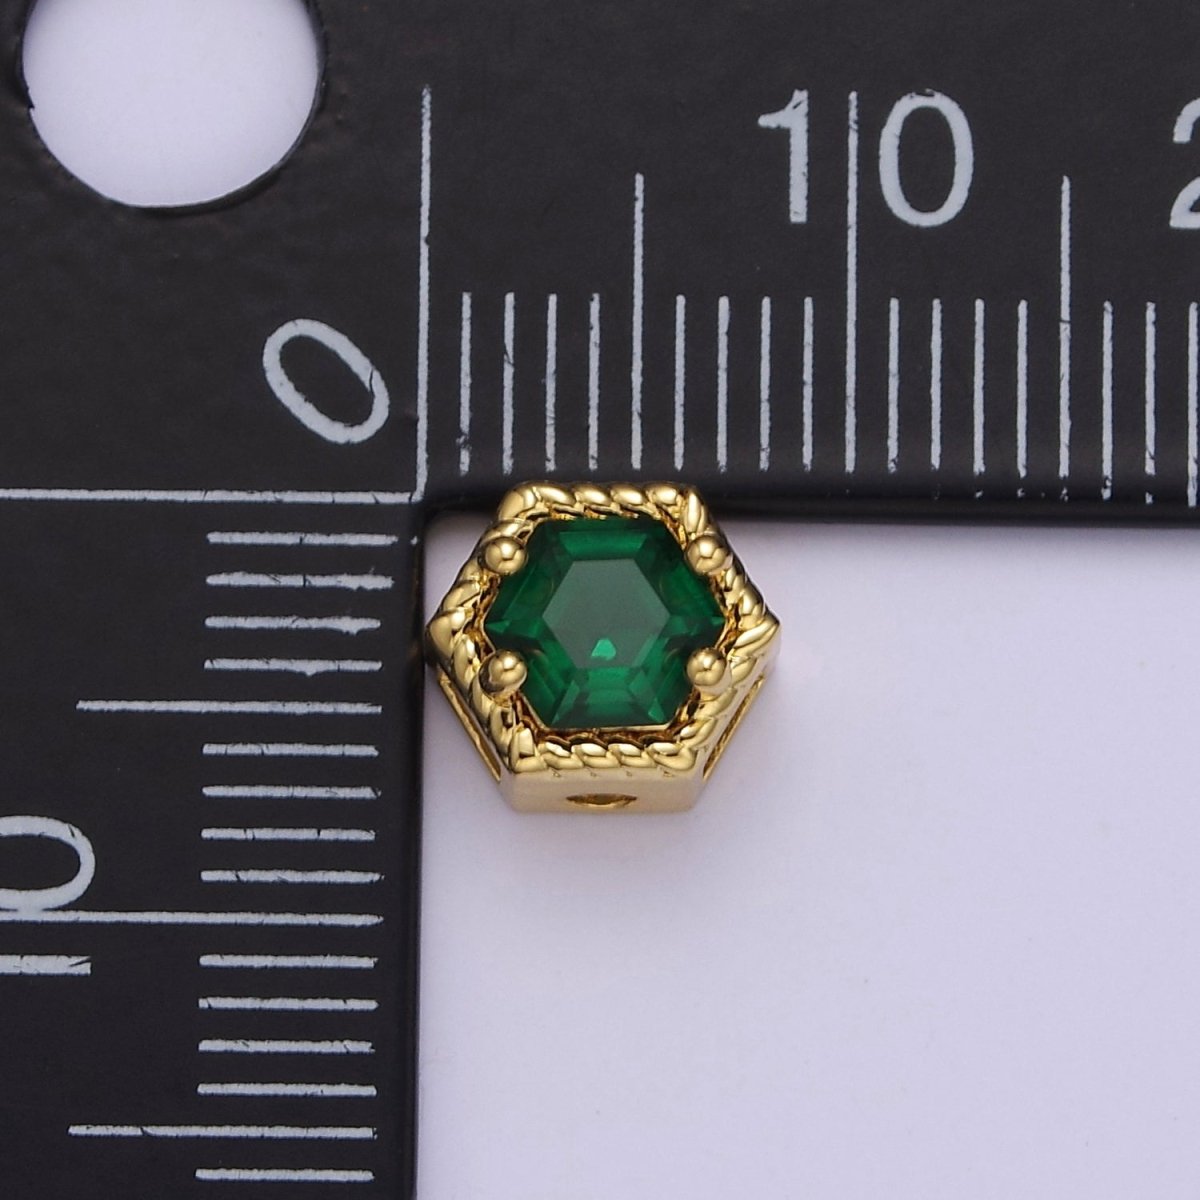 24K Gold Filled Octagon Bead Spacer CZ Micro Pave Geometric Bead Connector Charm Bracelet Necklace for DIY Jewelry Making Supply B-337 - B-341 - DLUXCA